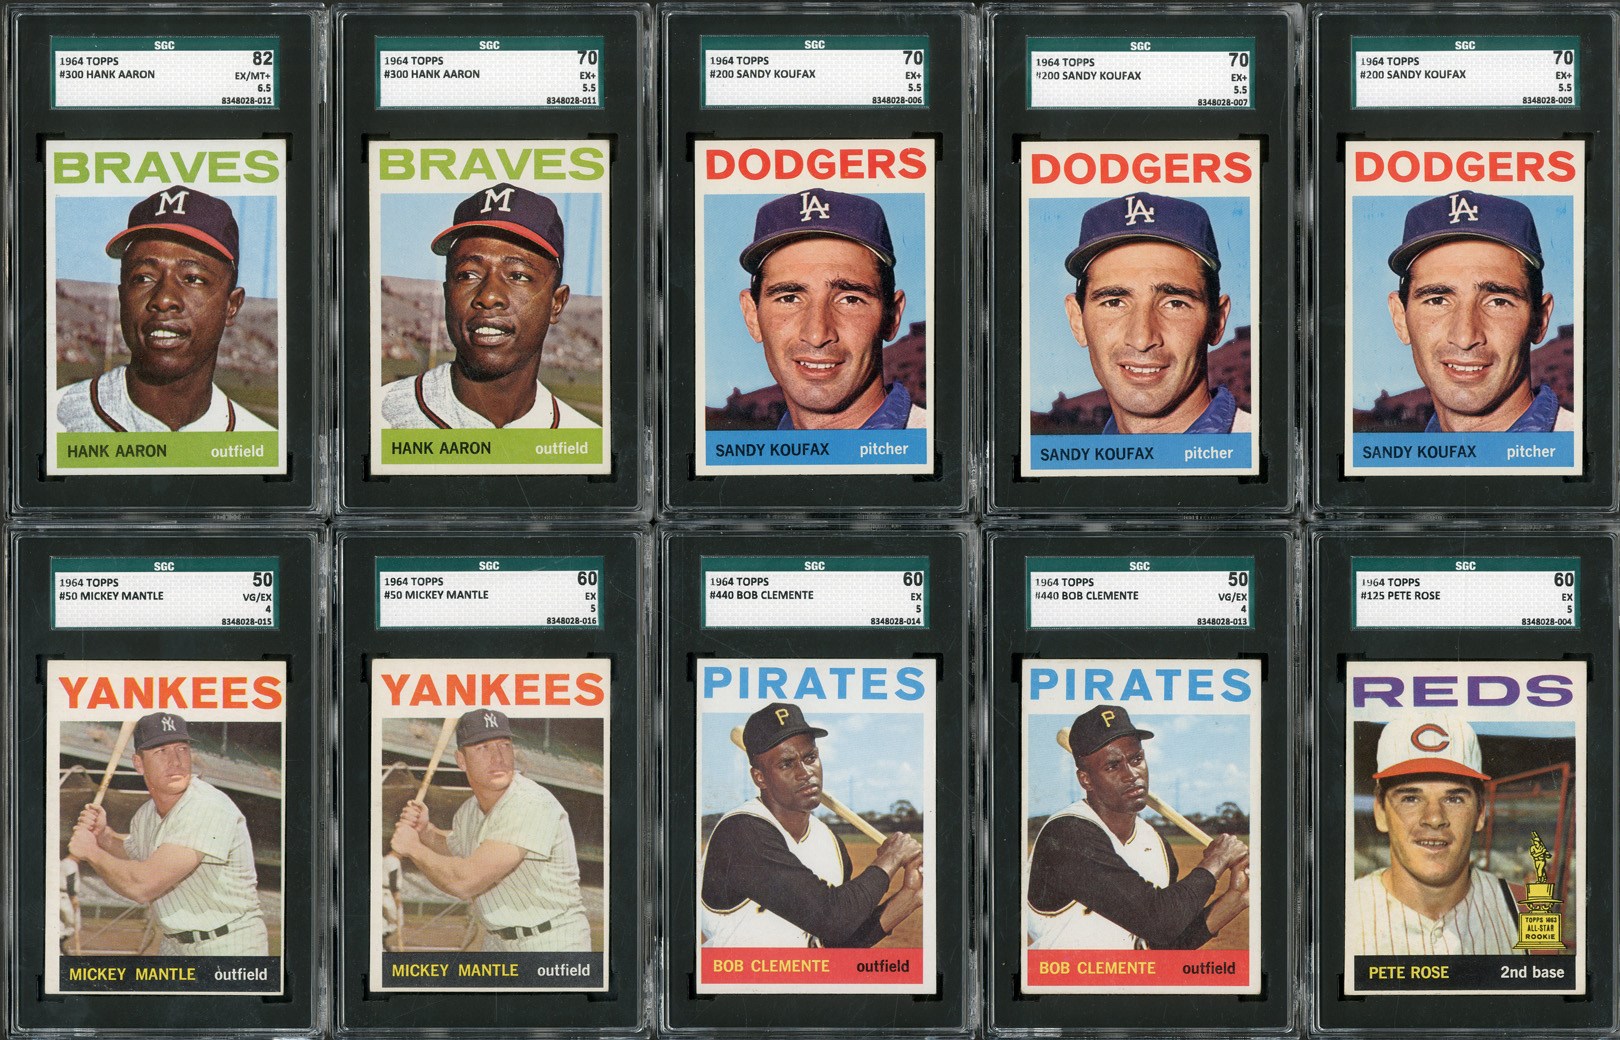 Baseball and Trading Cards - 1964 Topps Mid-to-High Grade Lot of 1500+ with 100+ Stars including Mantle and Rose